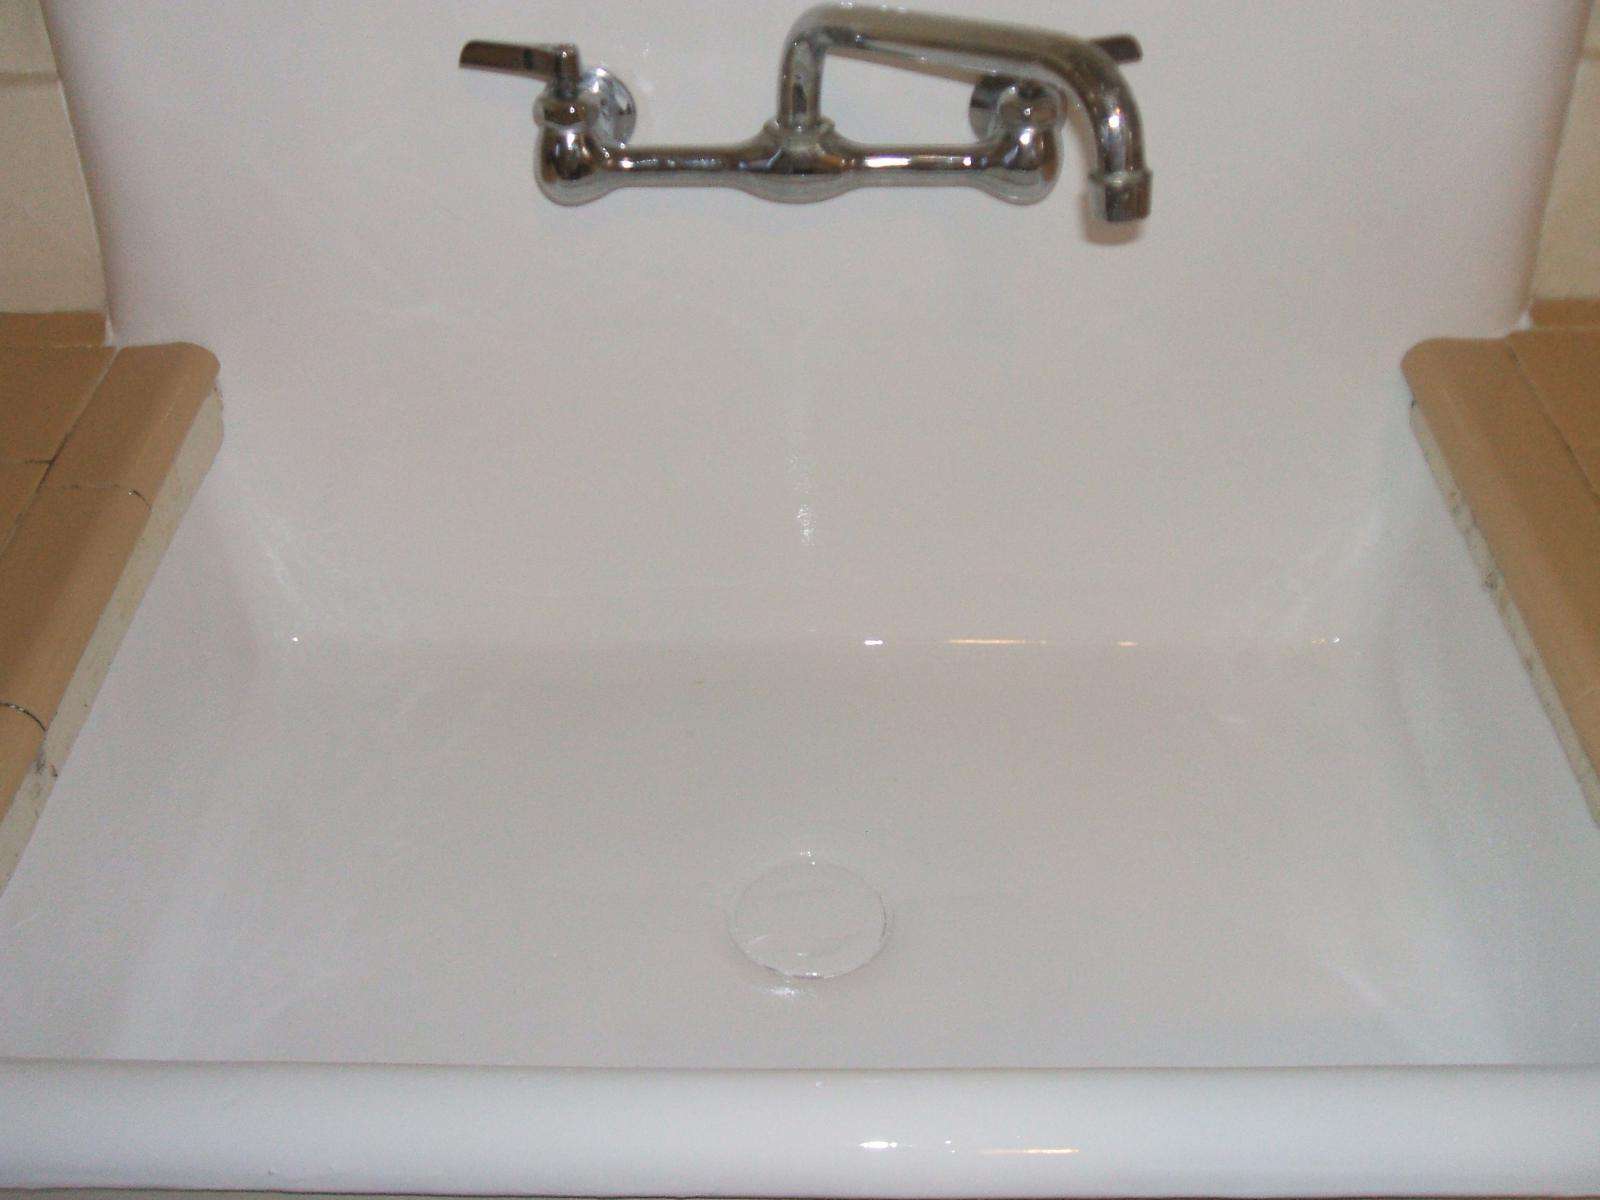 Sink after refinishing